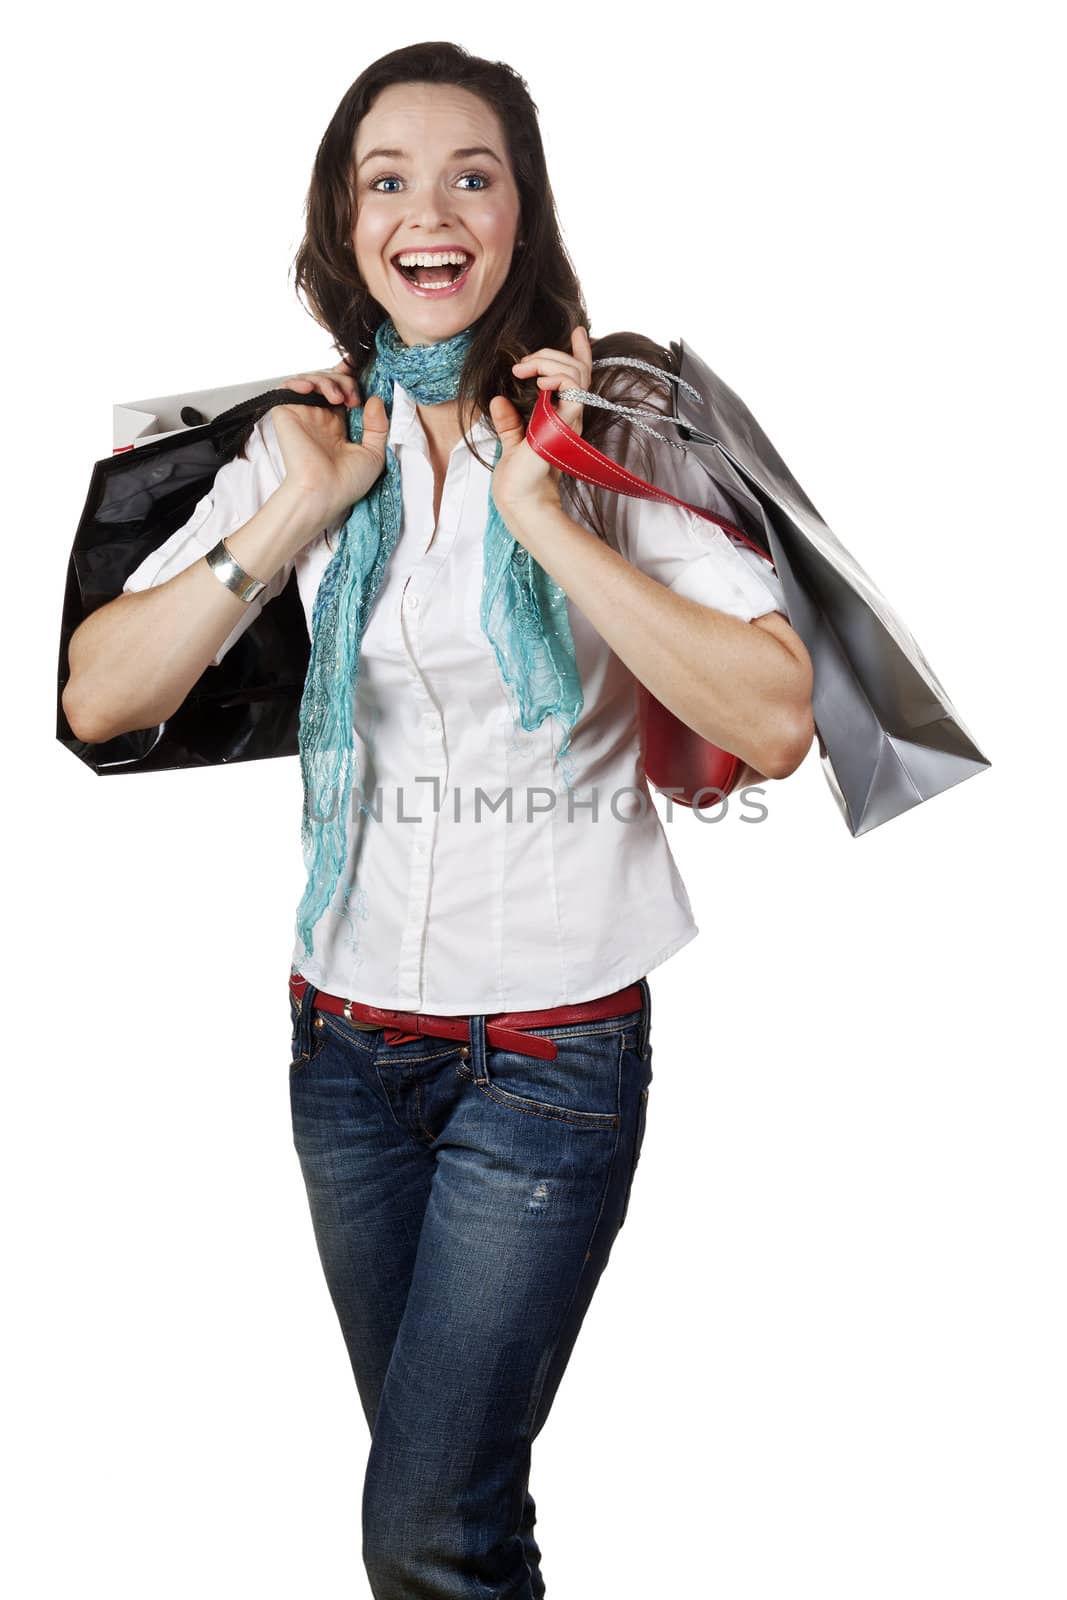 A very beautiful, casual and happy girl holding shopping bags and laughing. Isolated on white.